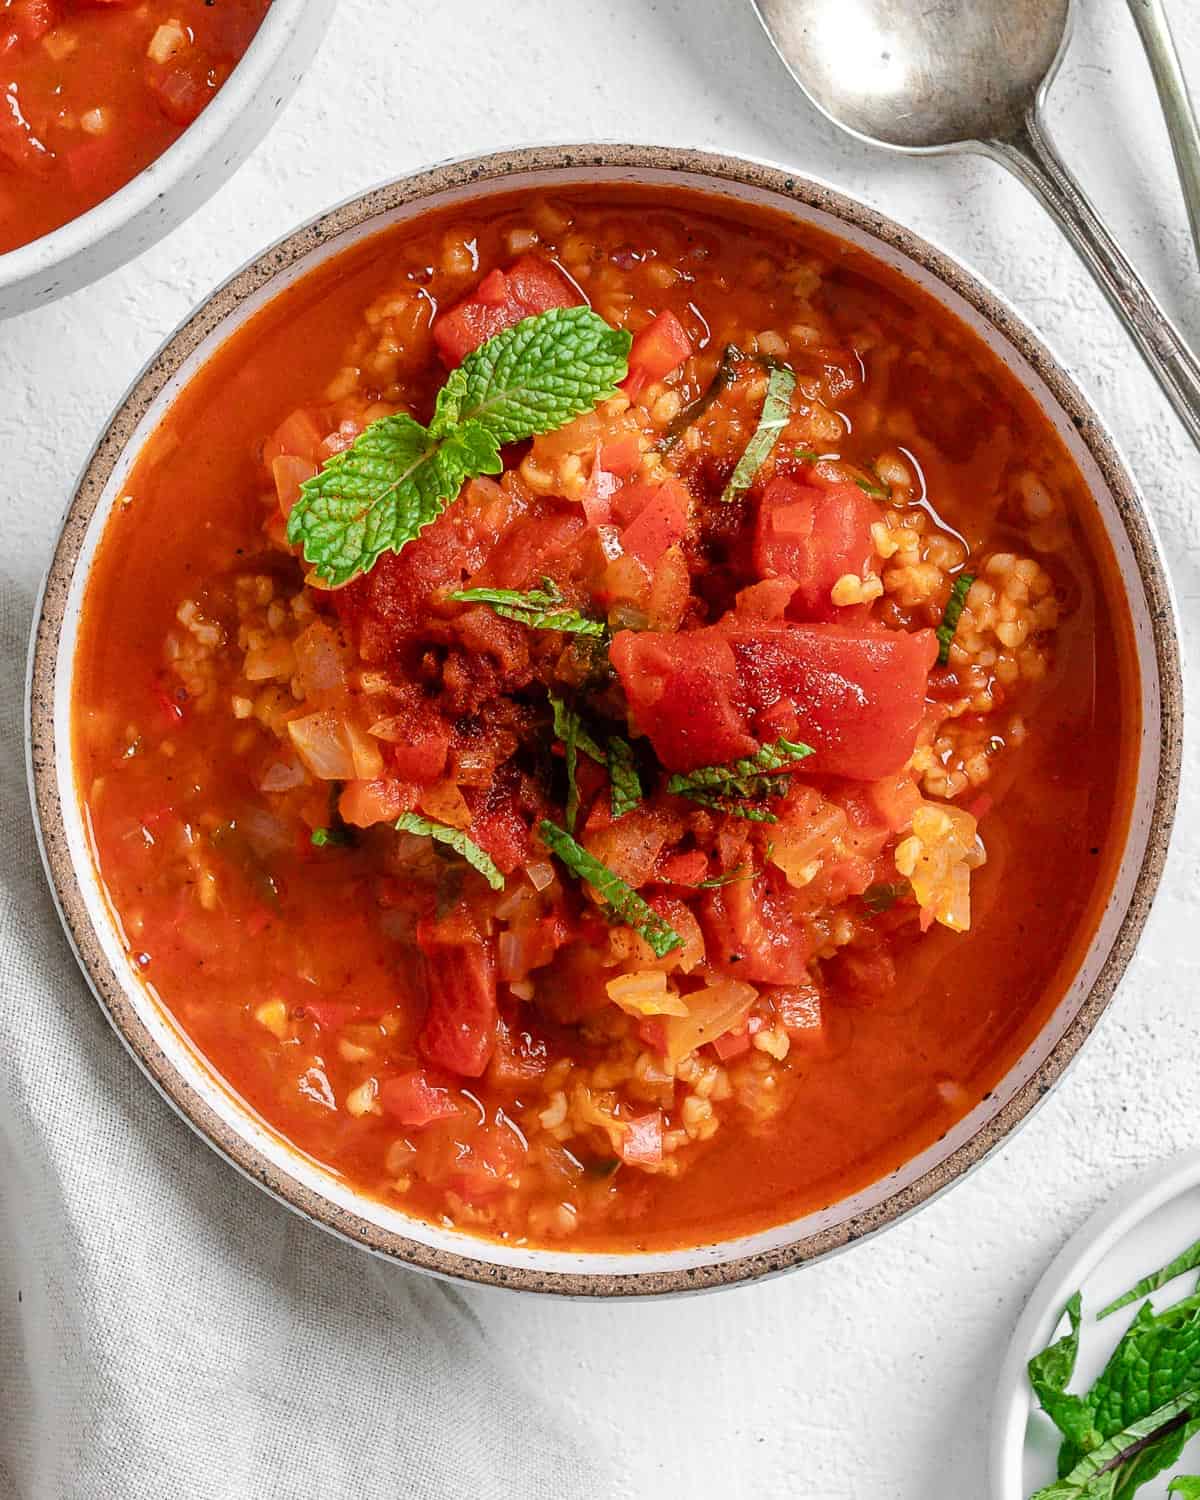 completed Turkish Tomato, Bulgur, and Red Pepper Soup in a bowl against a white surface 